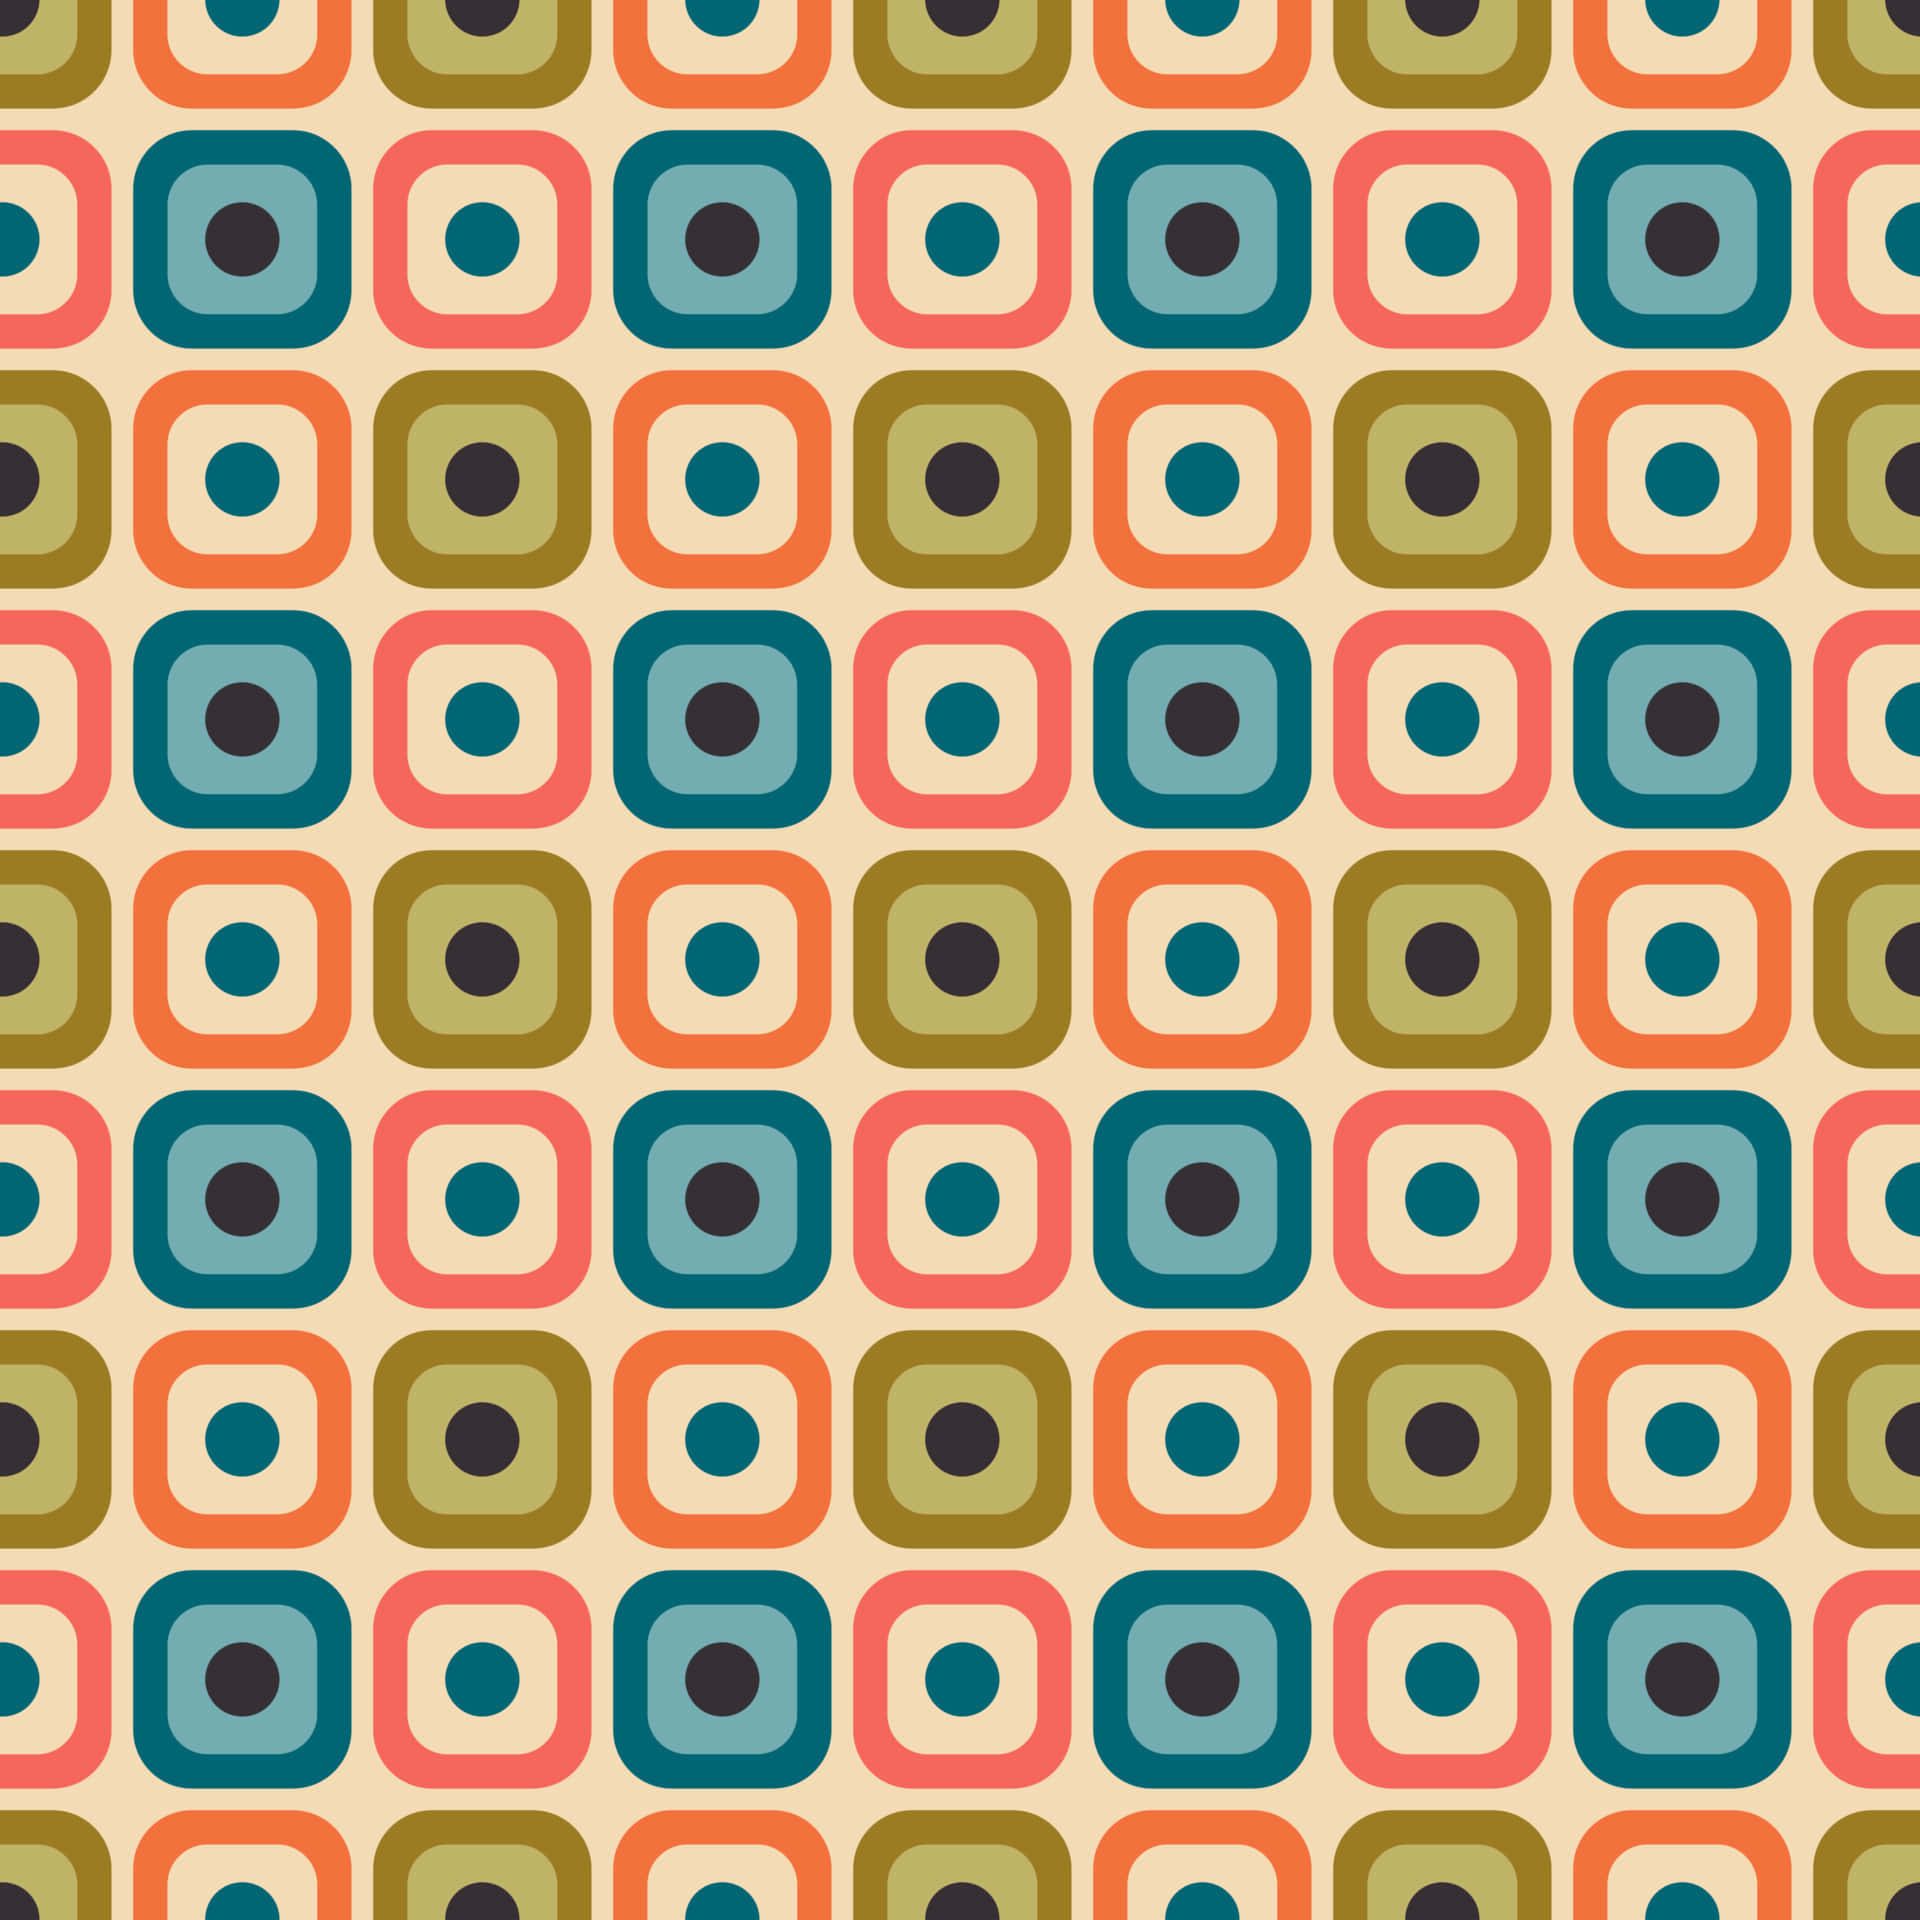 Seamless Square Aesthetic 70s Background For Desktop